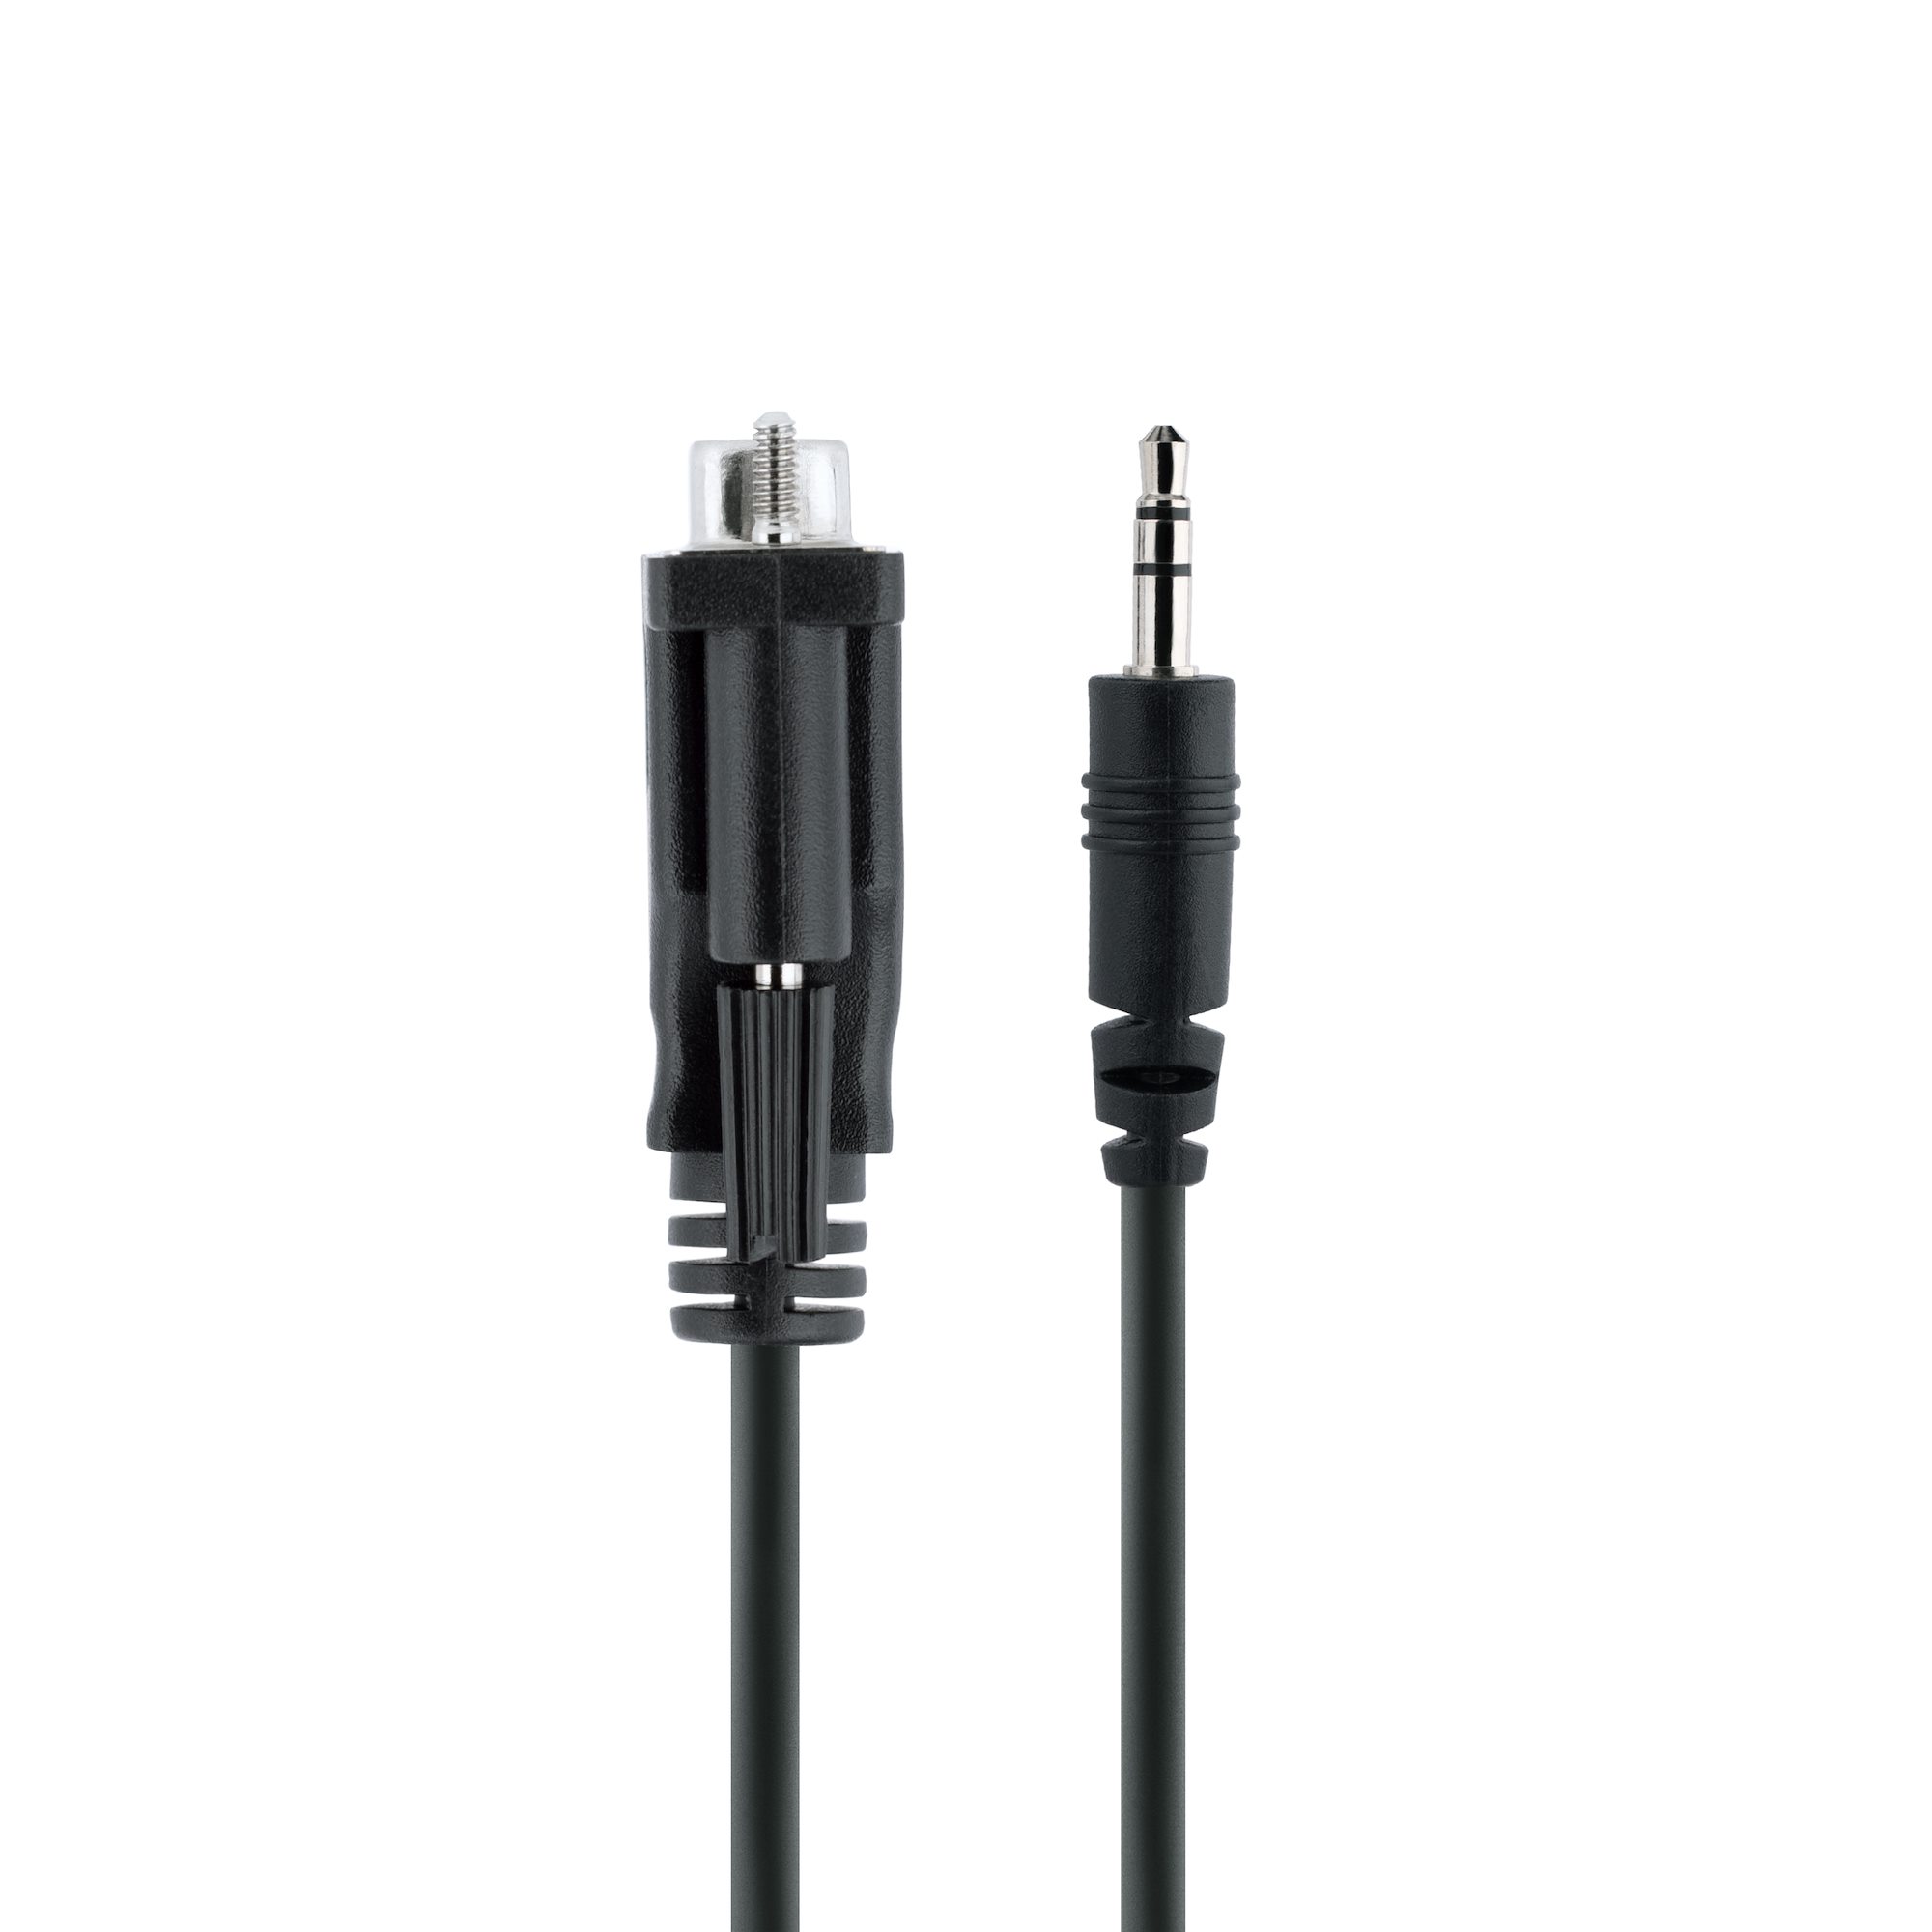 3ft DB9 to 3.5mm Serial Cable, RS232 - DB9 Cables & DB25 Cables, Cables